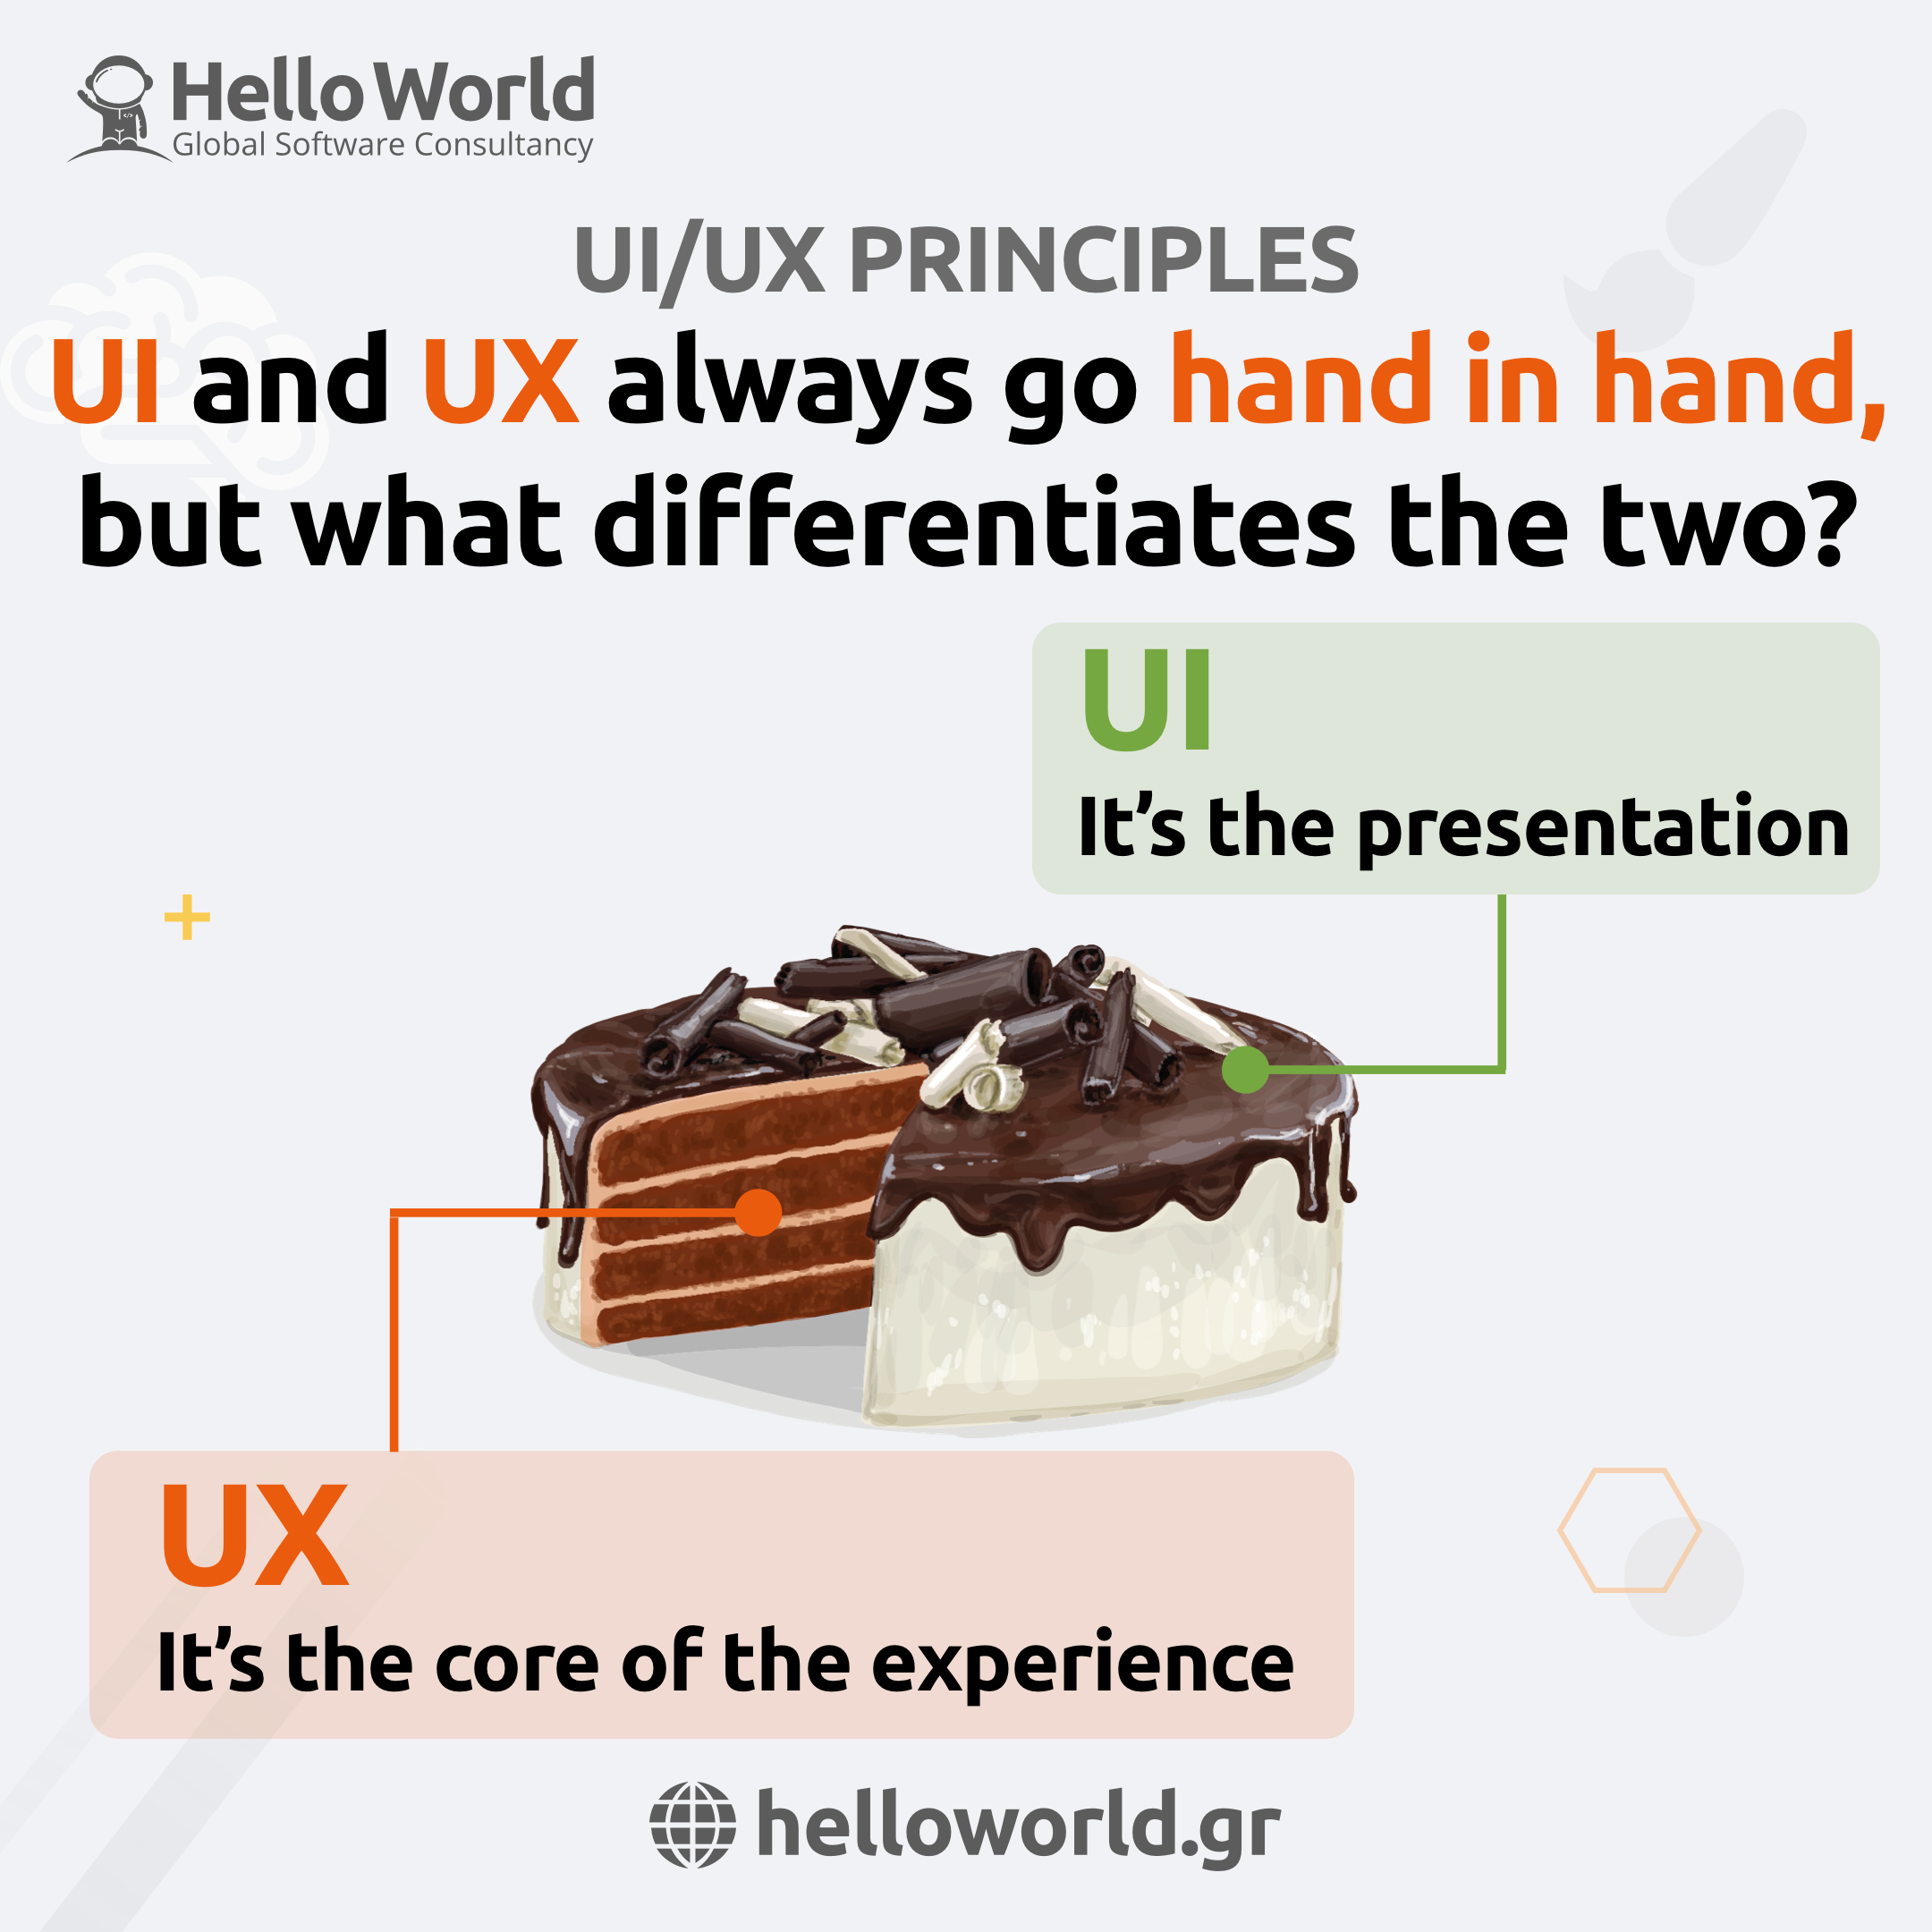 UI and UX always go hand in hand, but what differentiates the two?